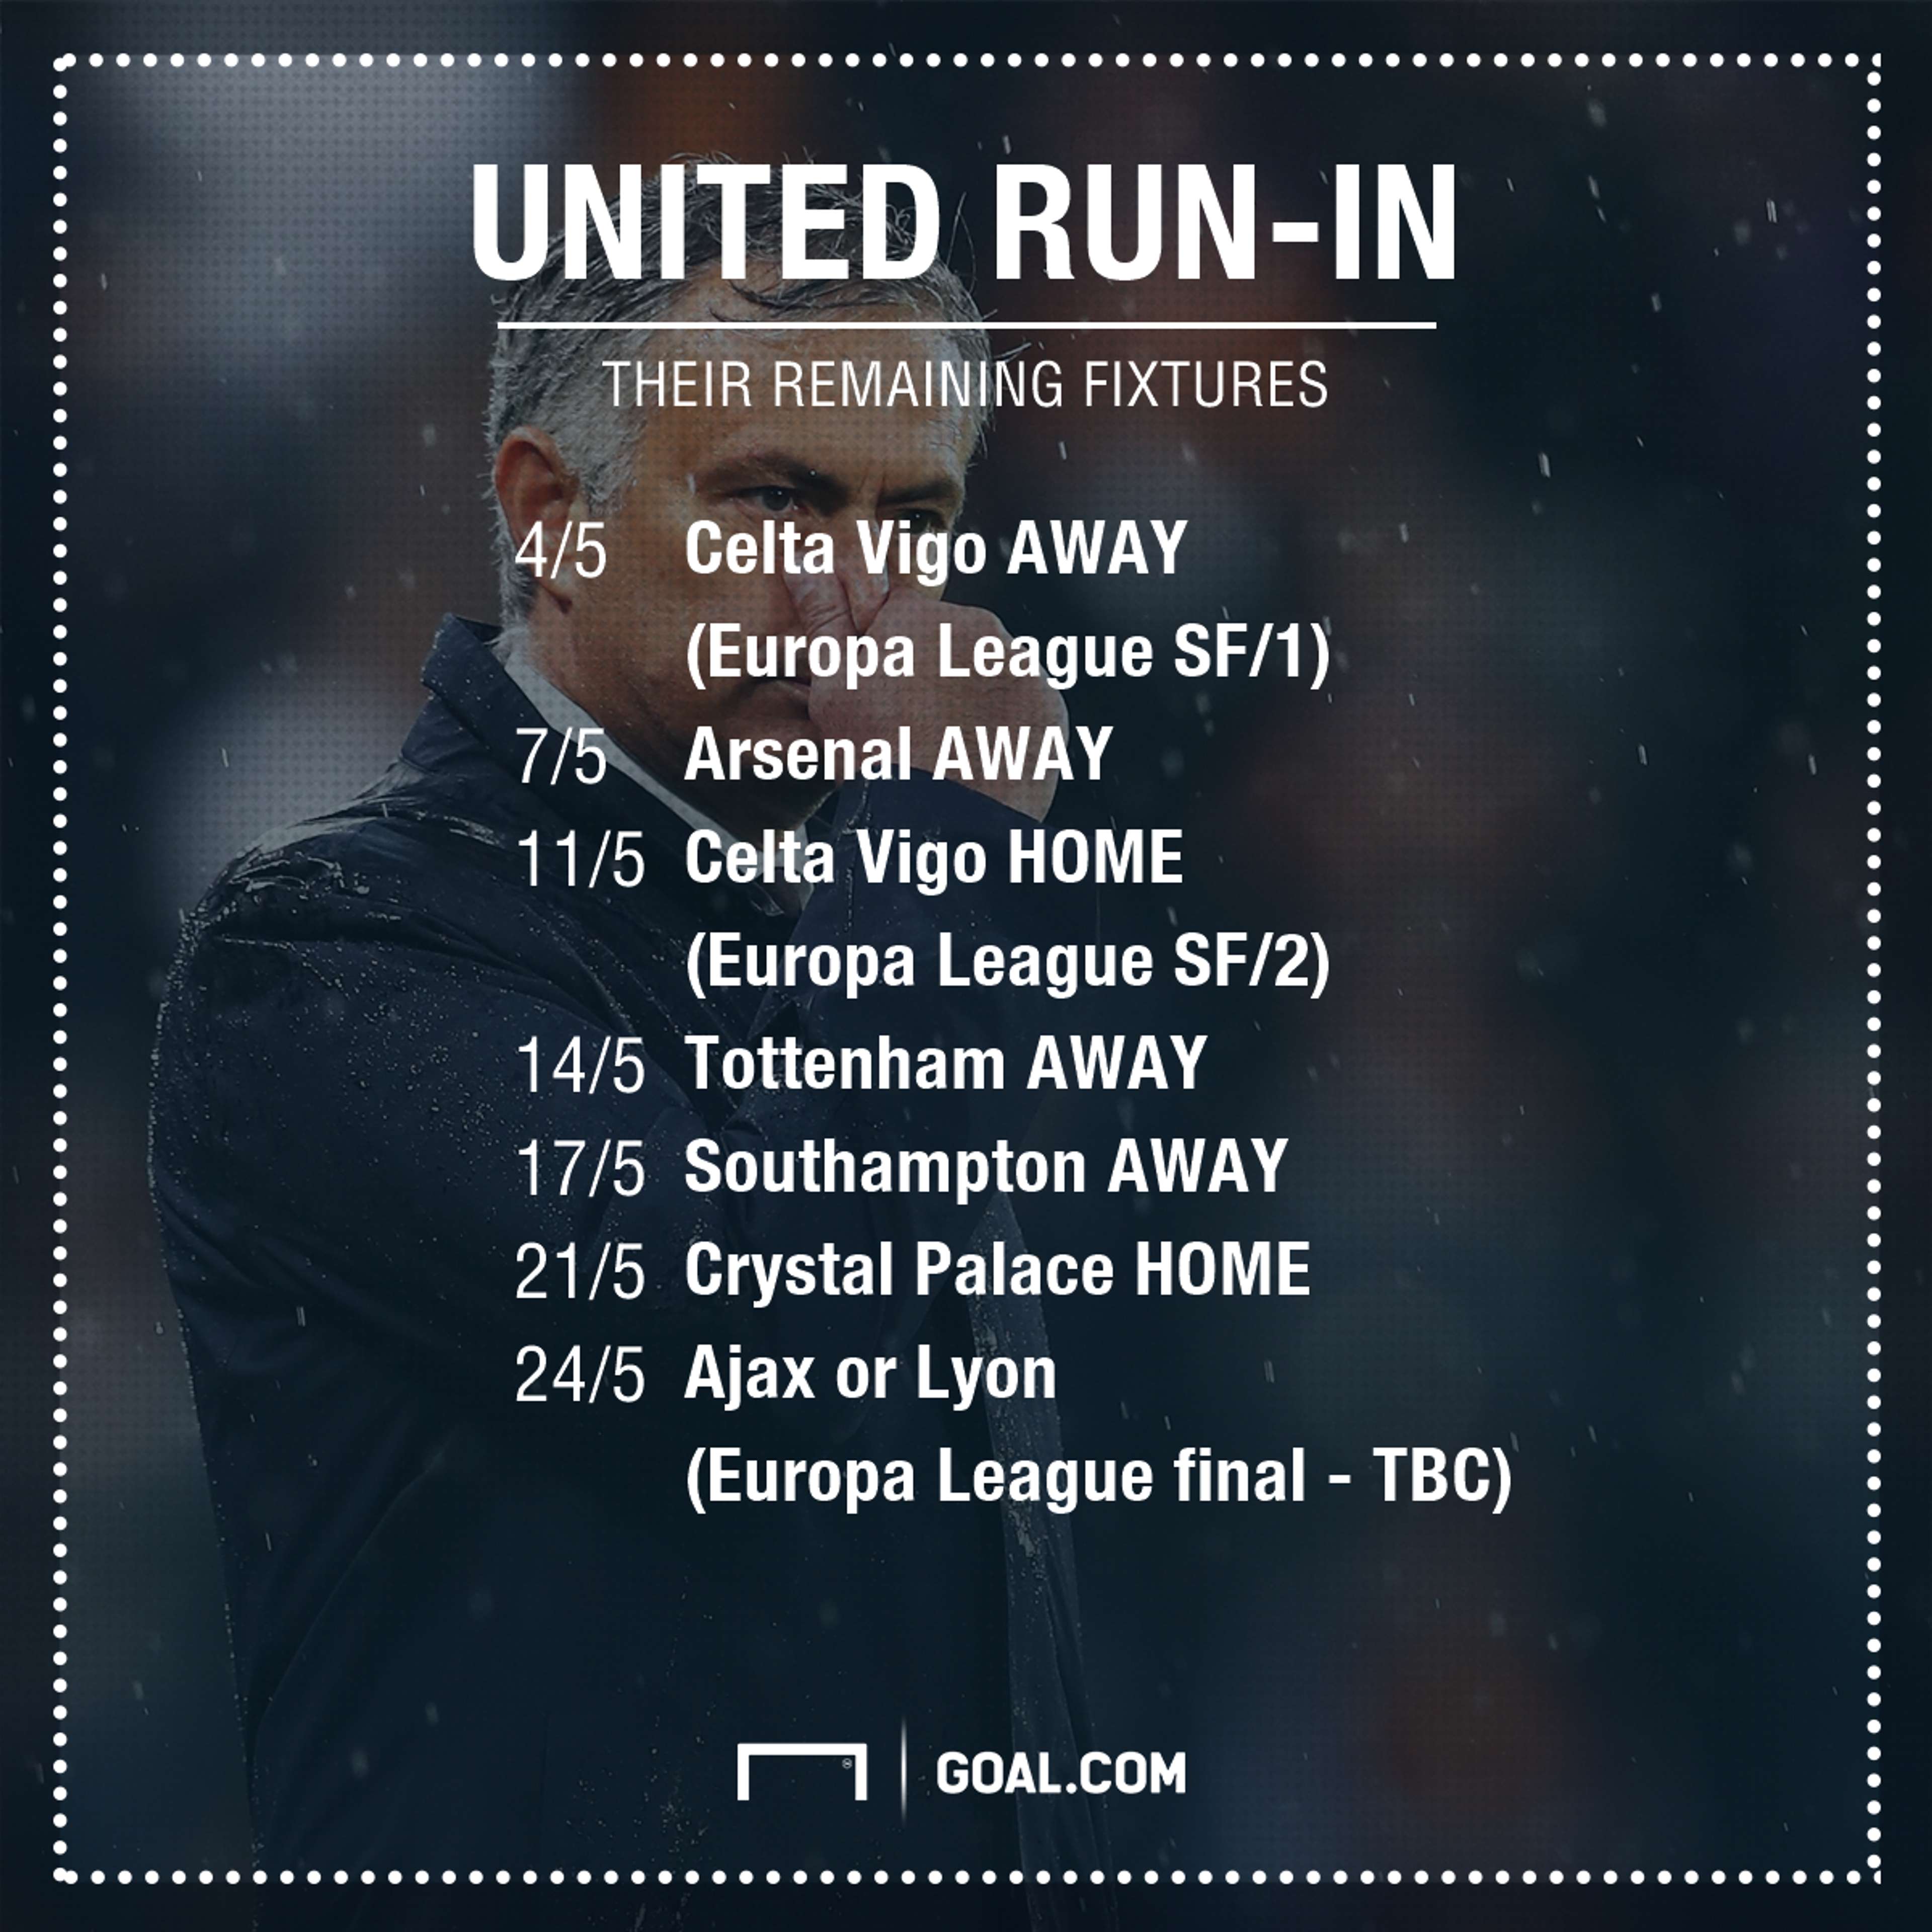 Manchester United fixtures